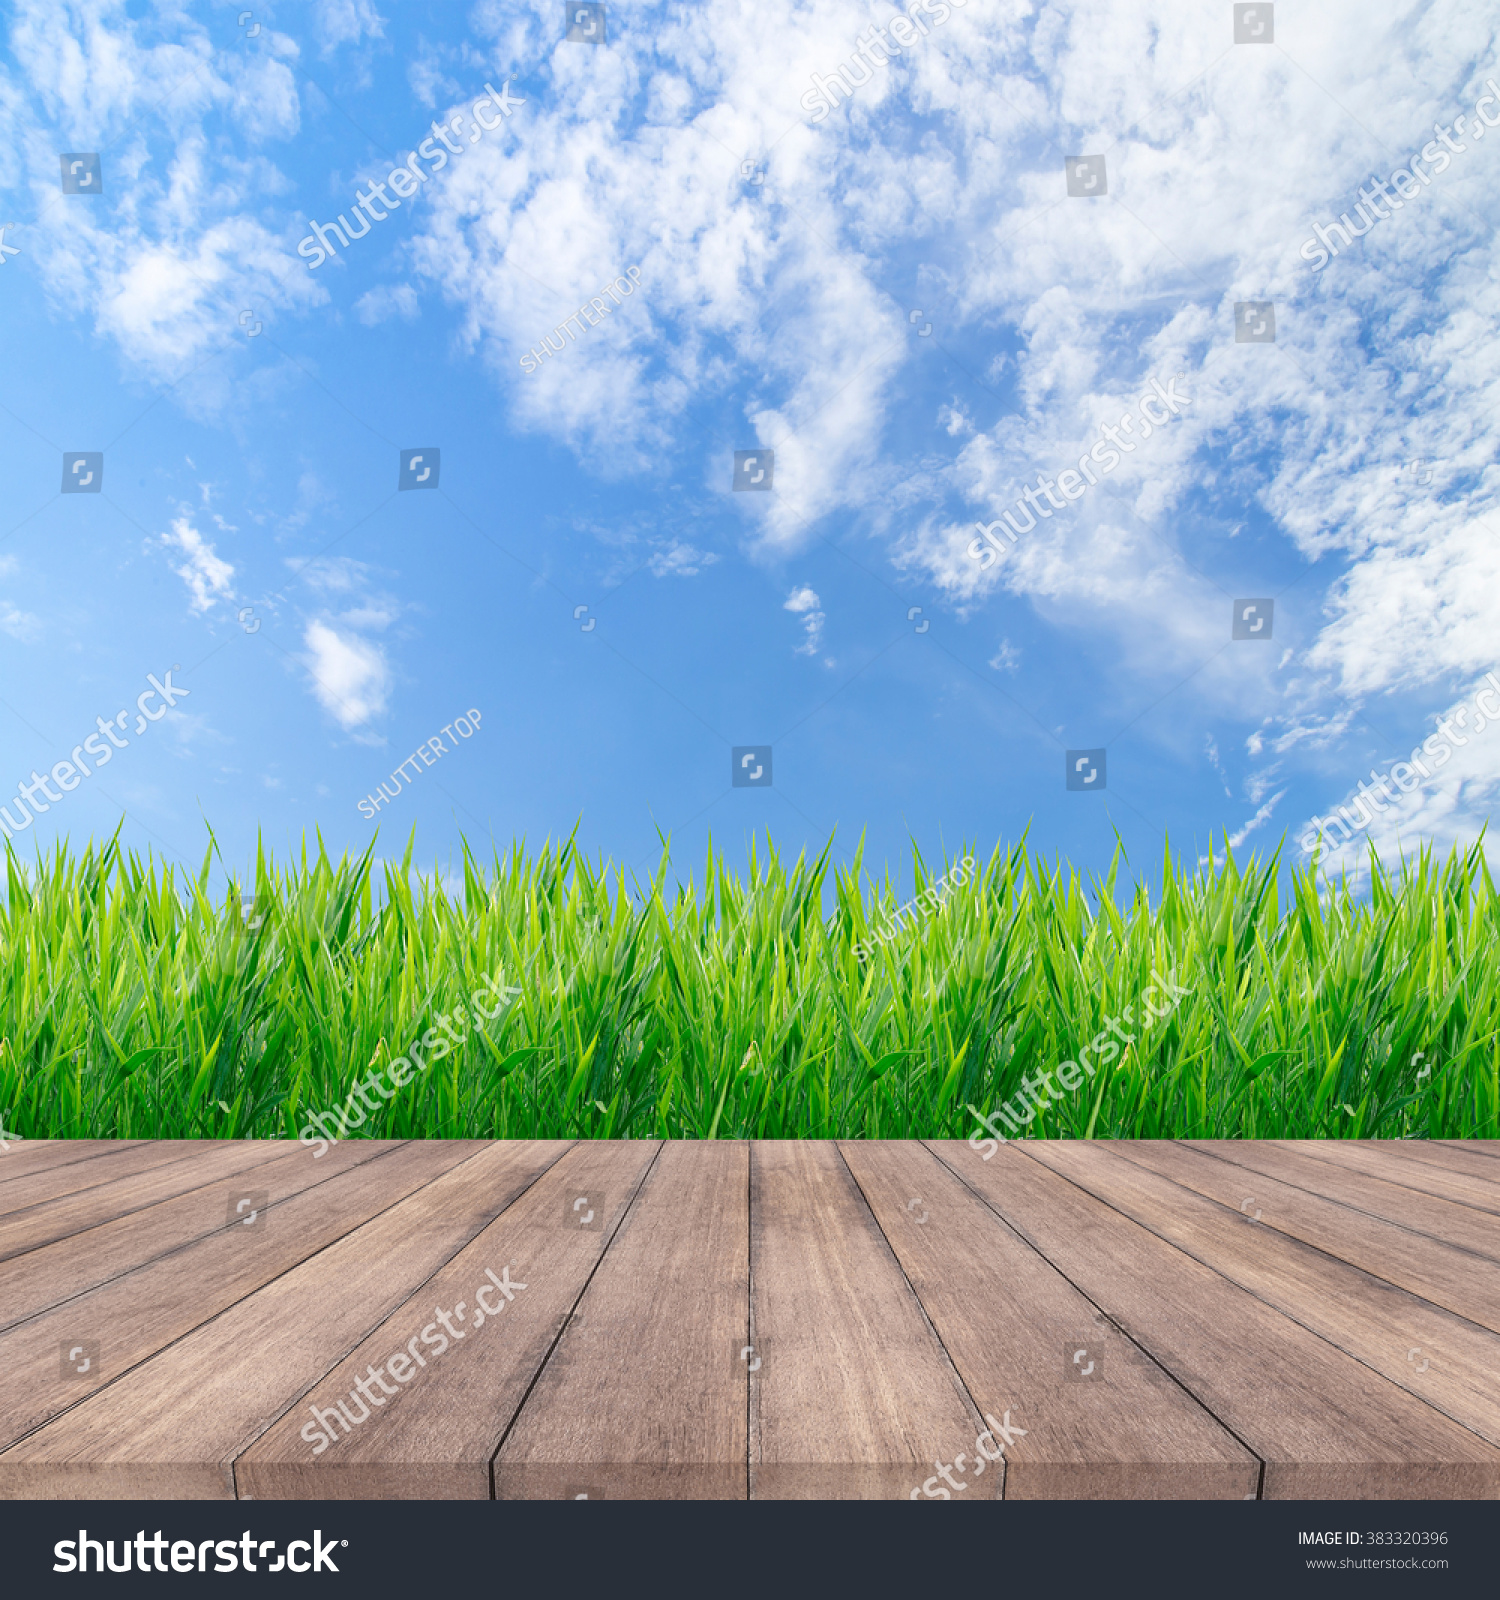 Fresh Spring Green Grass Sky Background Stock Photo & Image (Royalty ...